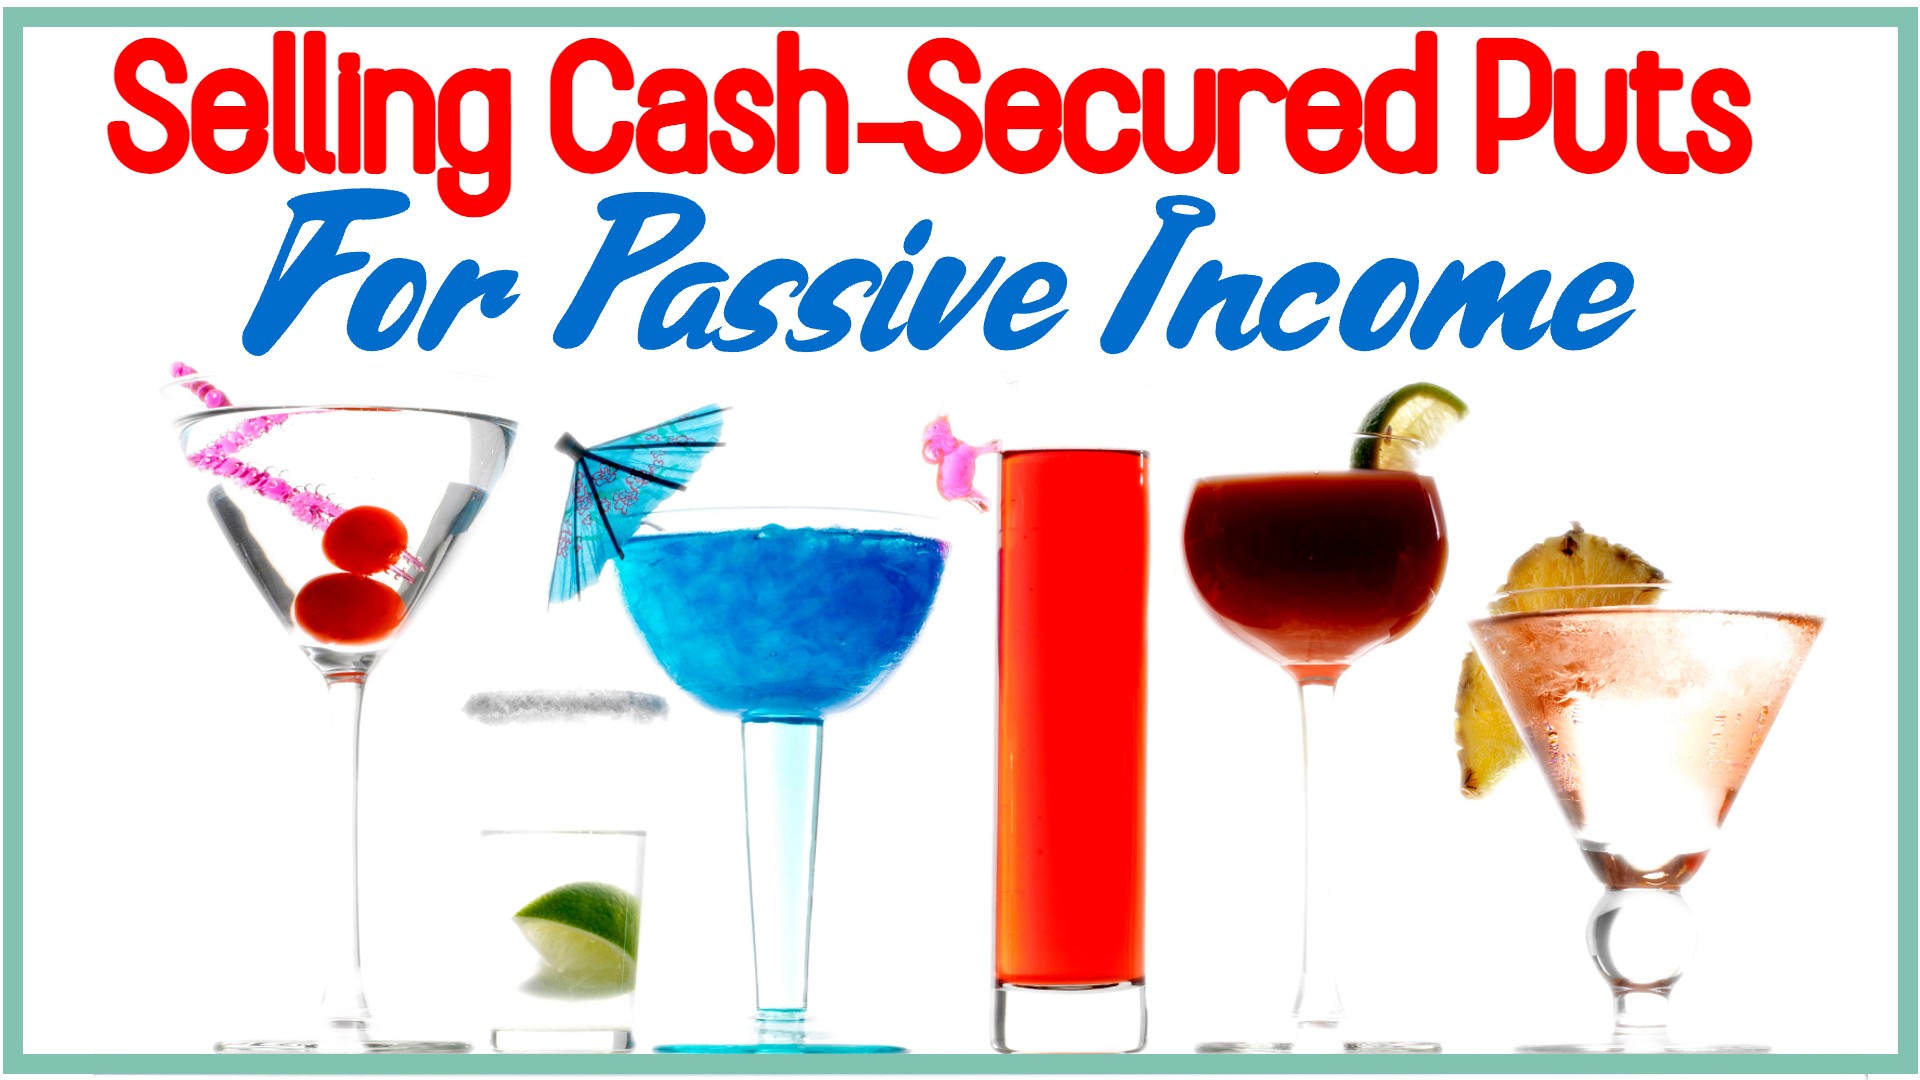 Selling Cash-Secured Puts for Passive Income